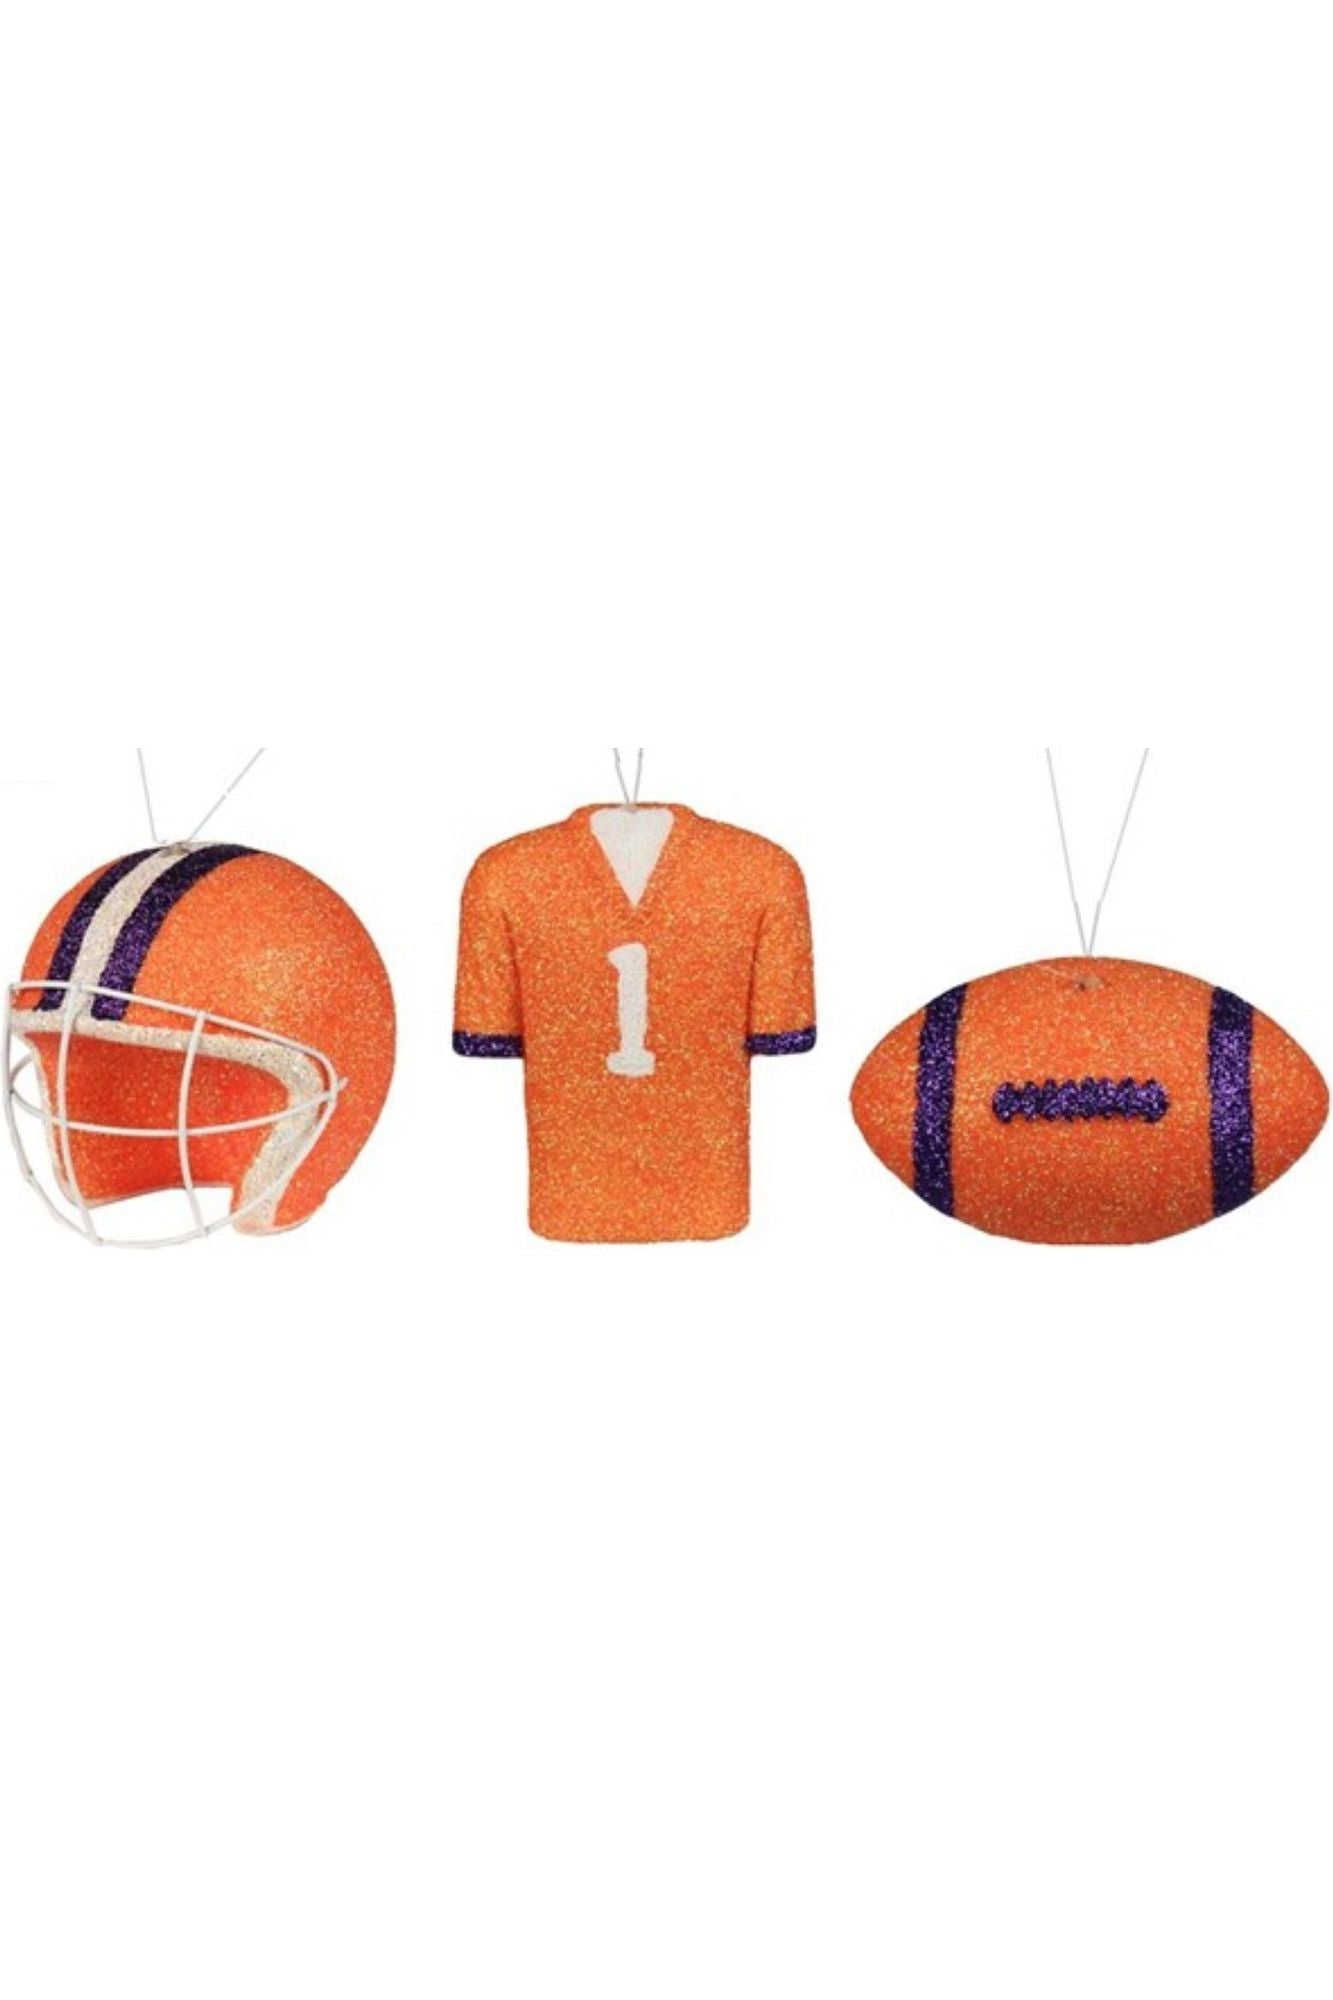 Glitter Football Ornament Assortment: Orange & Purple (Set of 3) - Michelle's aDOORable Creations - Holiday Ornaments